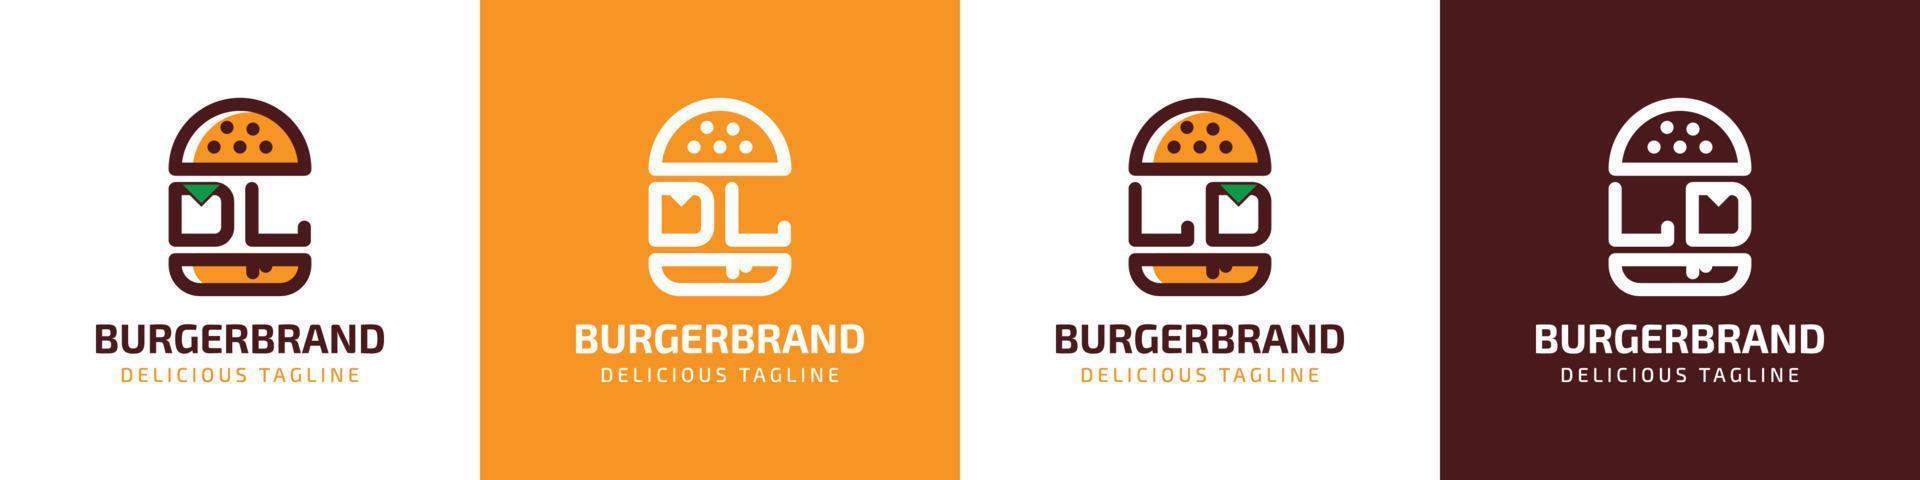 Letter DL and LD Burger Logo, suitable for any business related to burger with DL or LD initials. vector